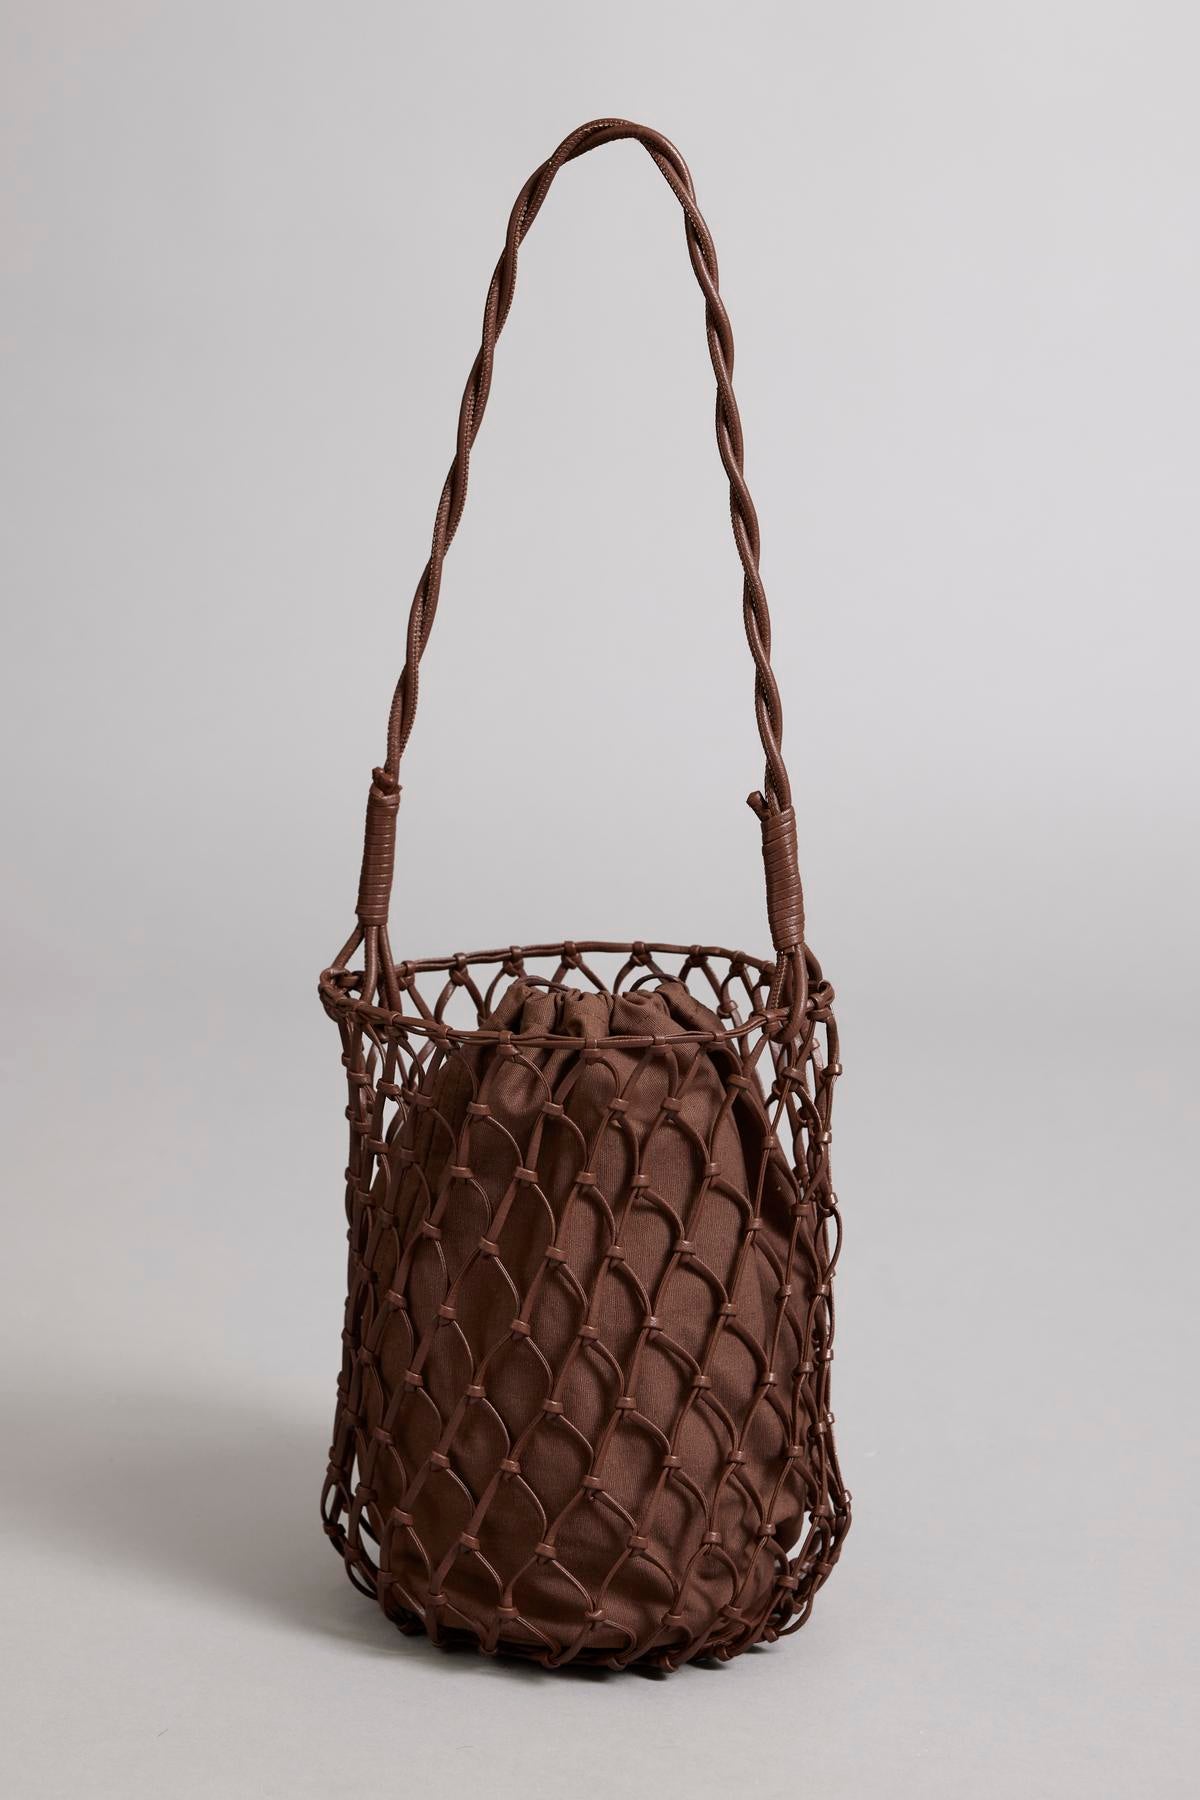 Brown vegan leather Velvet by Graham & Spencer mesh tote bag with a long braided handle on a neutral background.-36543994265793